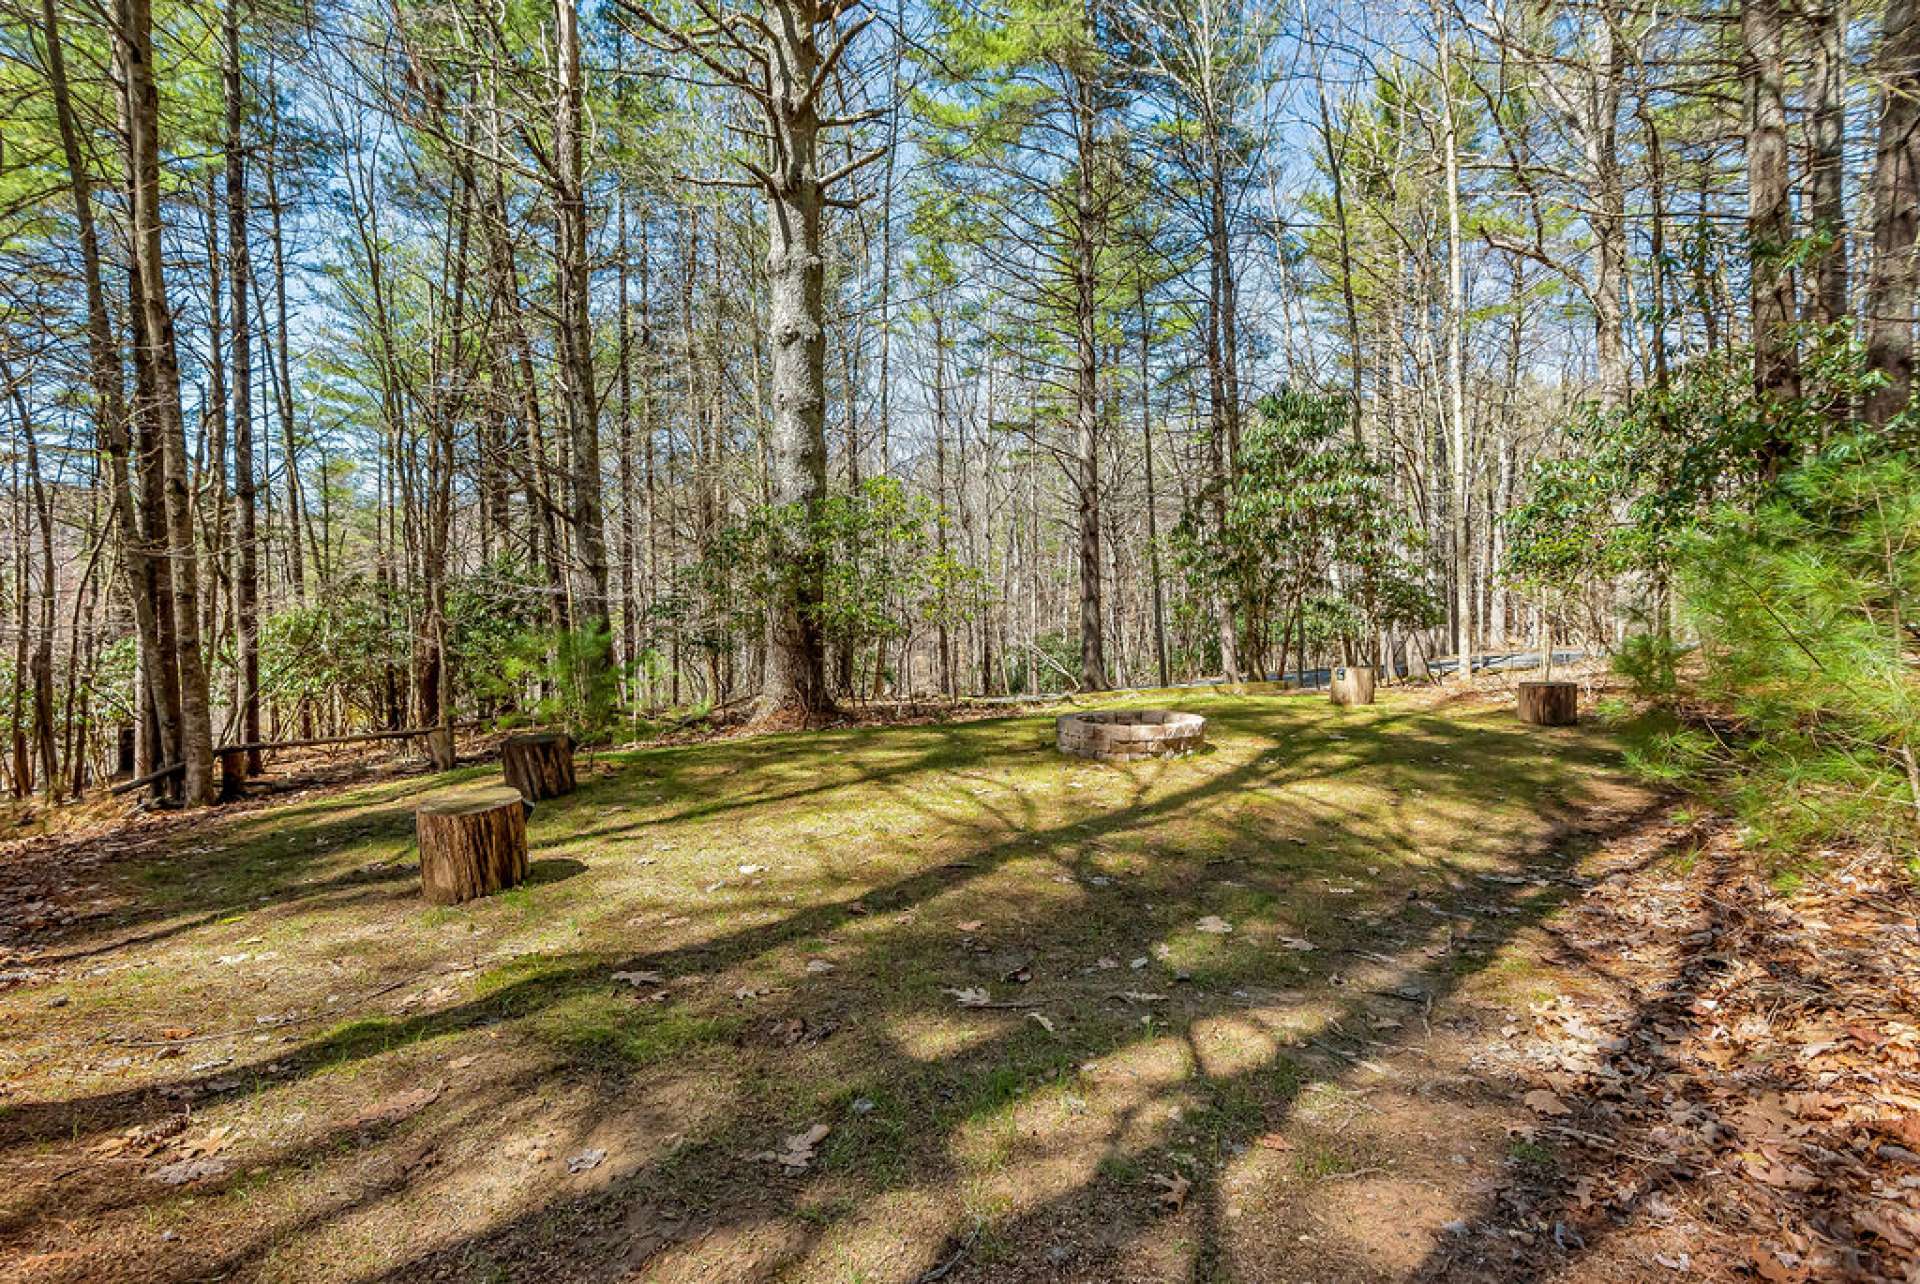 This expansive yard is perfect for pets, children, and cultivating your own woodland garden oasis.